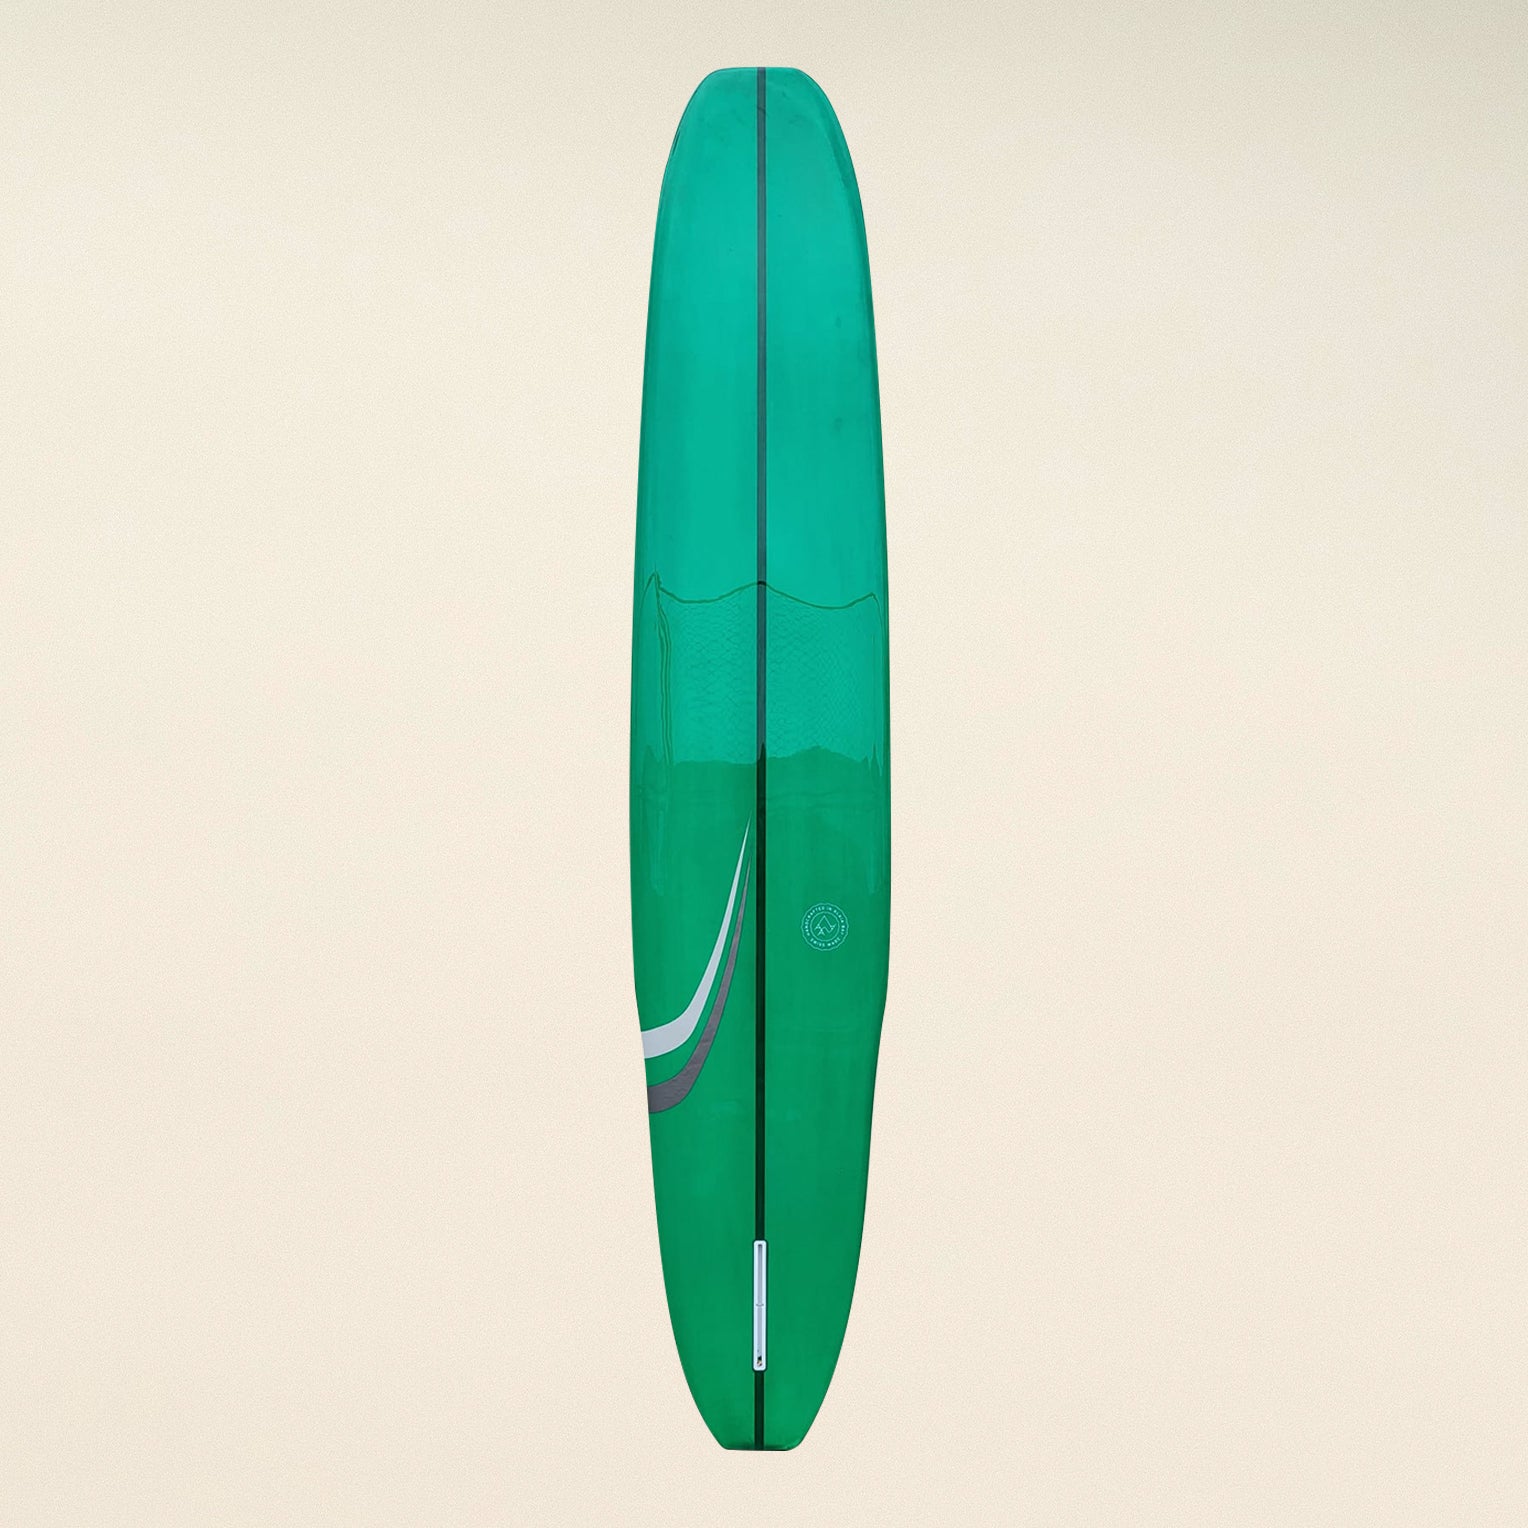 The Nose Machine - Green, Polished - 9'9